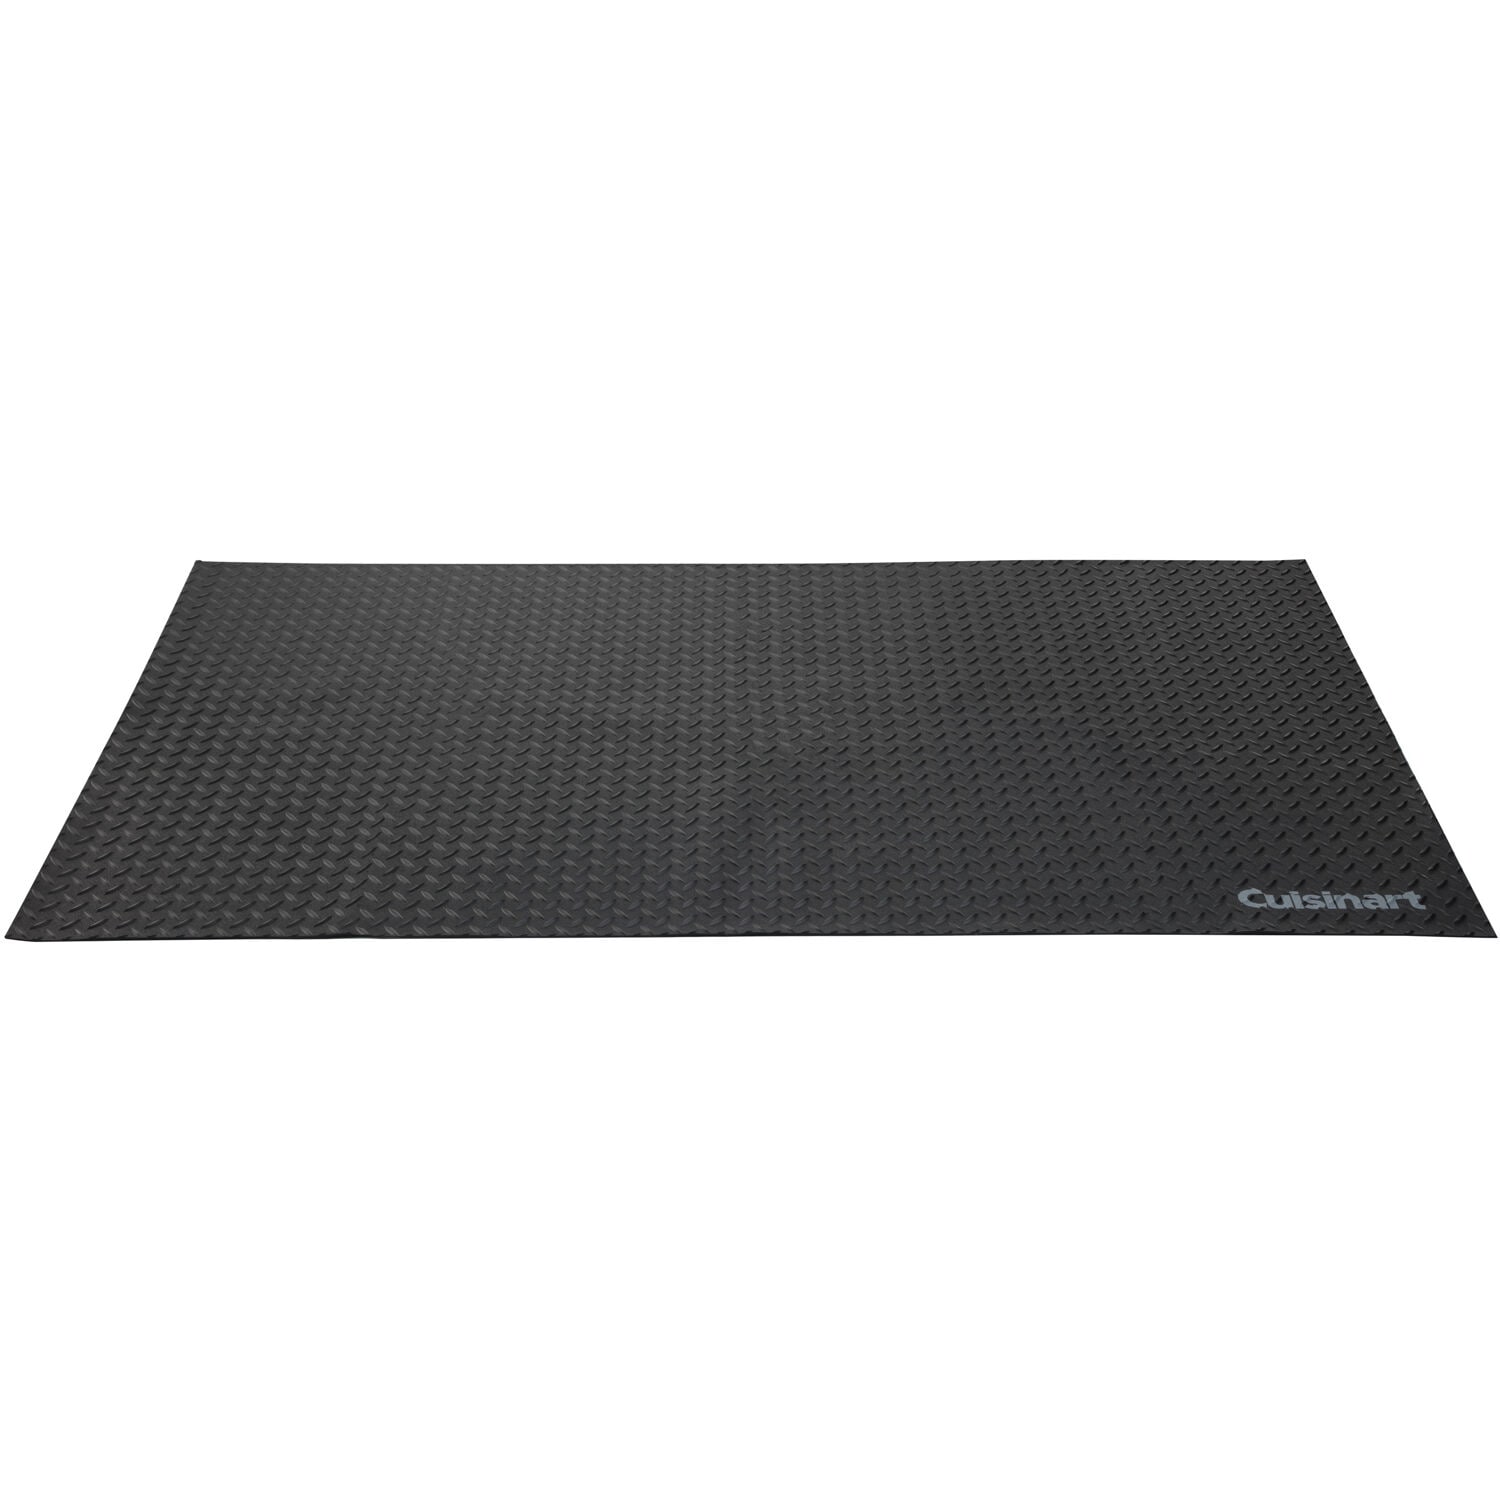  Grill Mat for Outdoor Grill Deck Protector, 65 x 36